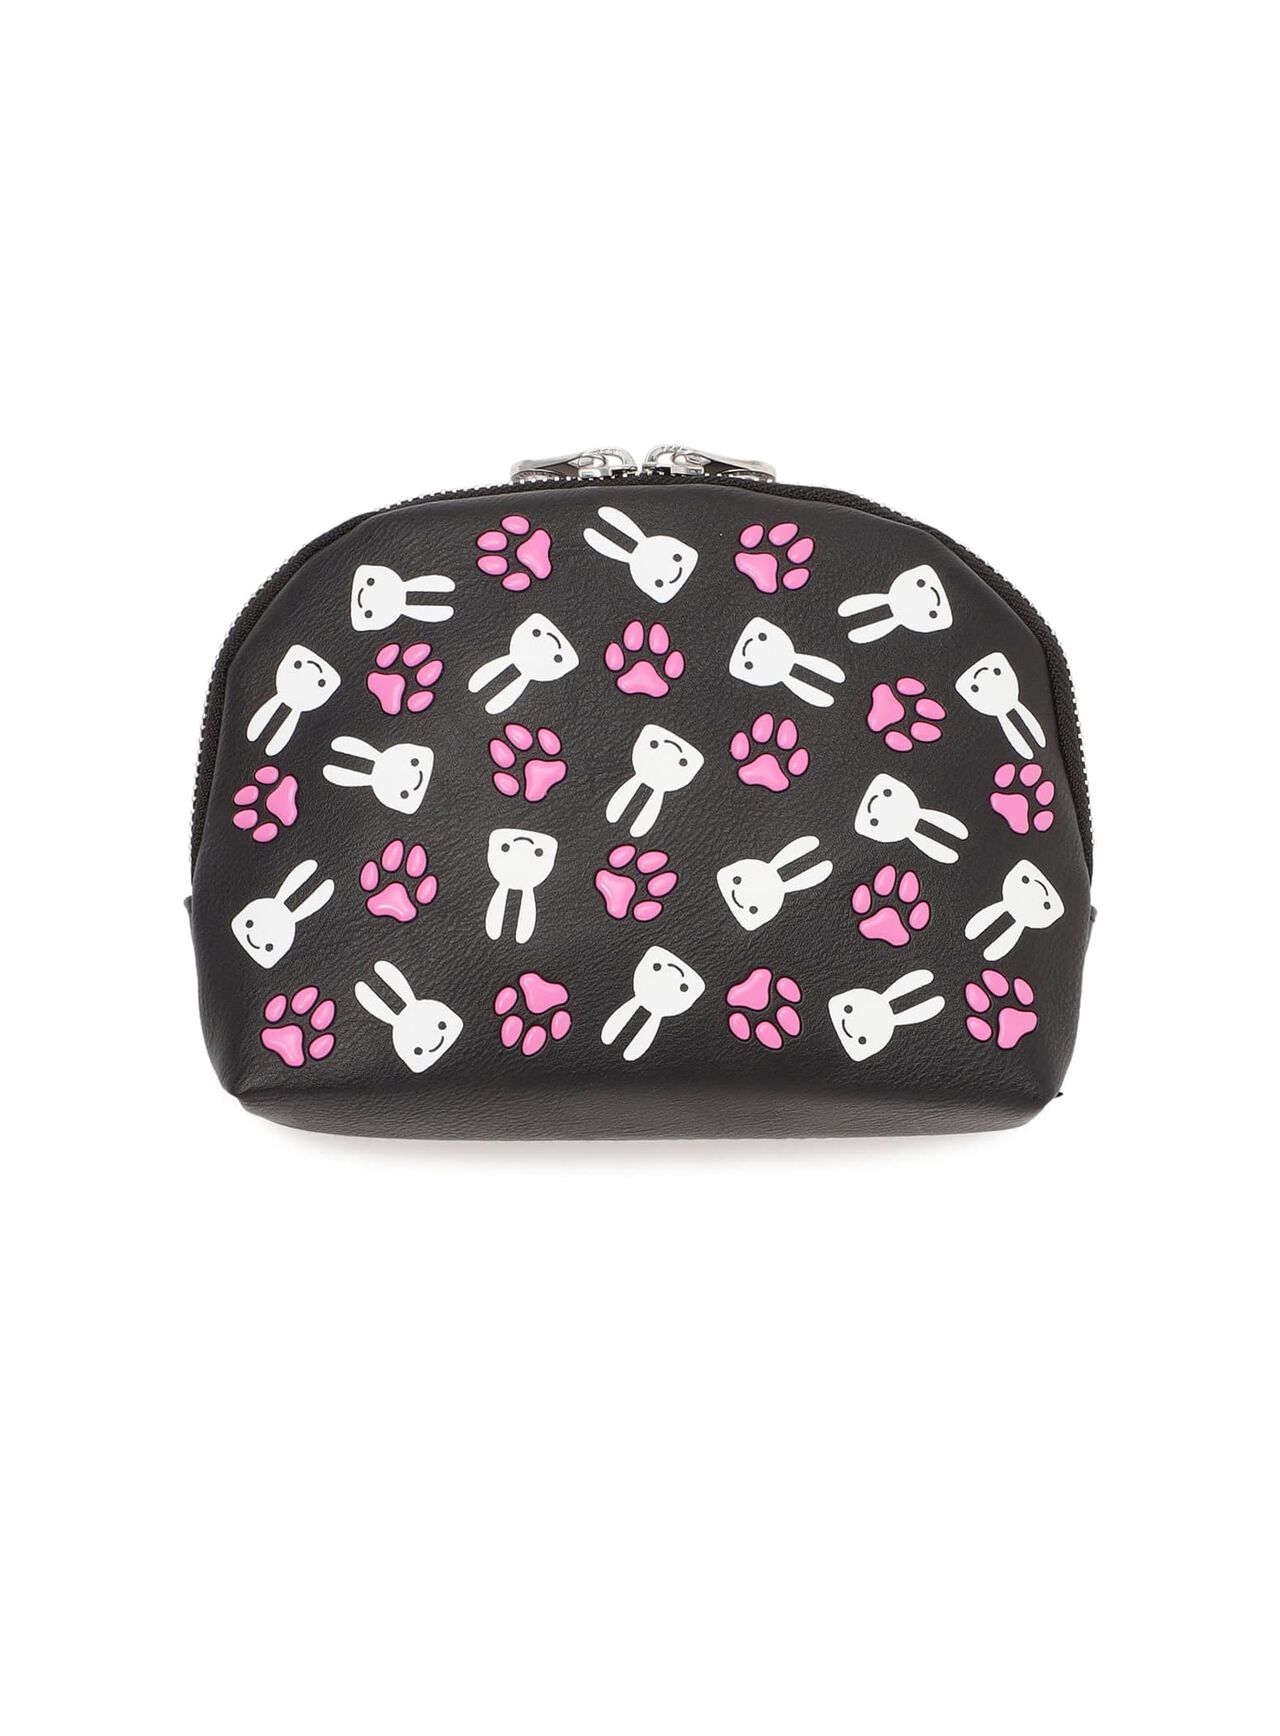 Printed Pouch 29th Paw Pouch,ONE, large image number 1